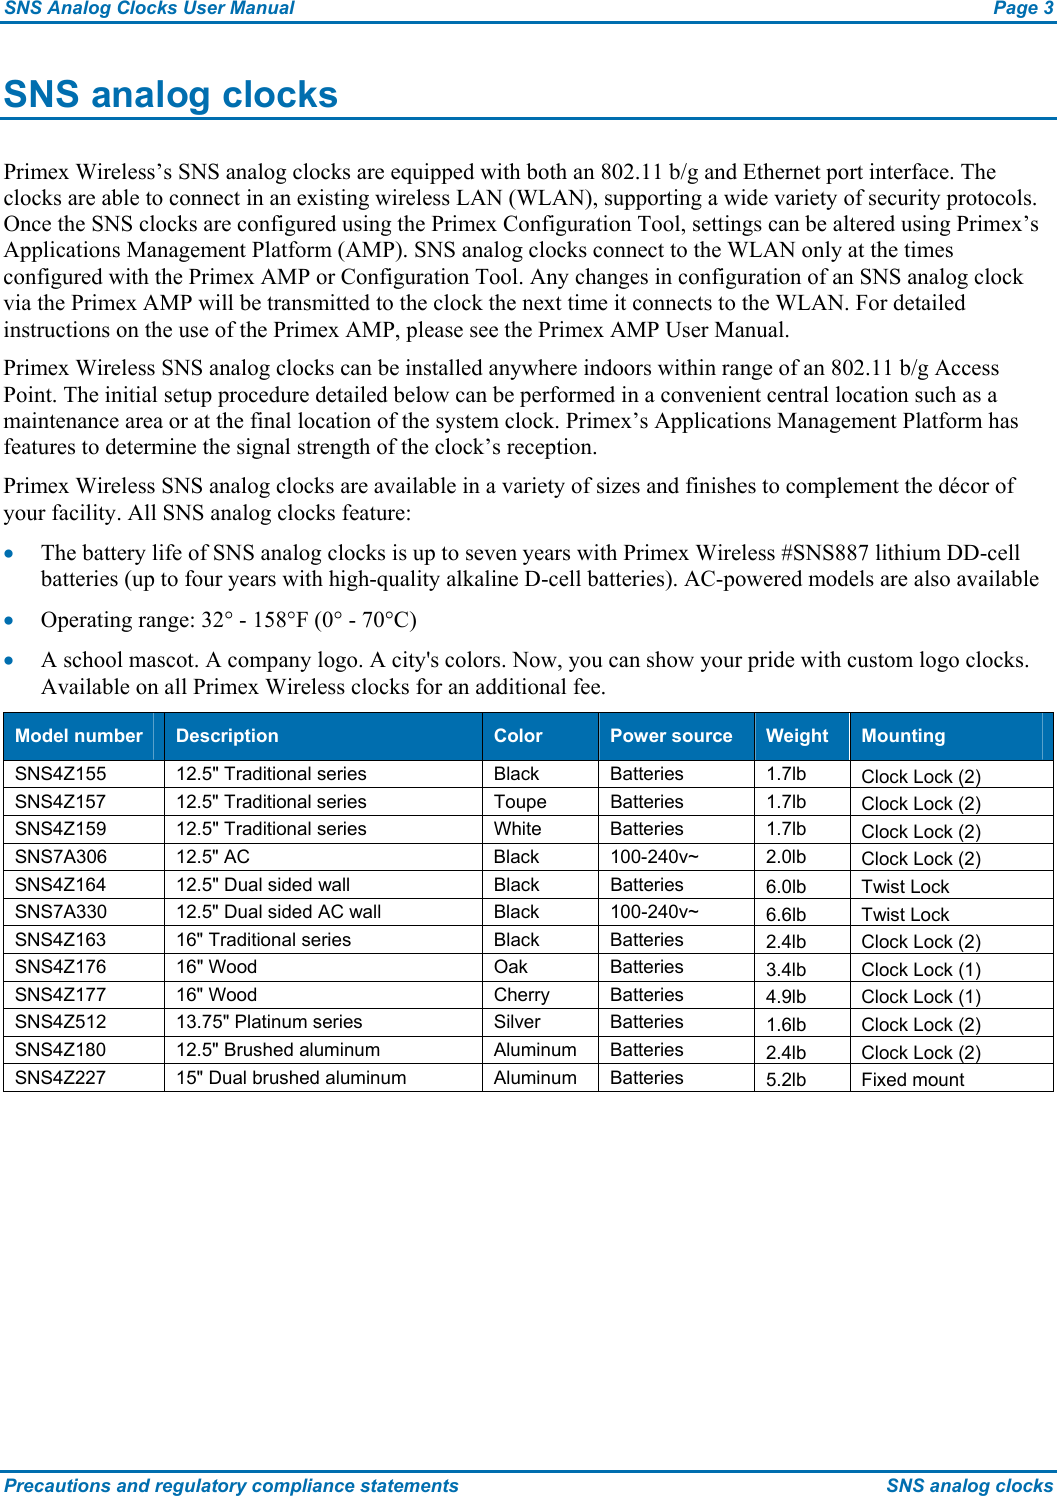 SNS Analog Clocks User Manual  Page 3 Precautions and regulatory compliance statements  SNS analog clocks SNS analog clocks Primex Wireless’s SNS analog clocks are equipped with both an 802.11 b/g and Ethernet port interface. The clocks are able to connect in an existing wireless LAN (WLAN), supporting a wide variety of security protocols. Once the SNS clocks are configured using the Primex Configuration Tool, settings can be altered using Primex’s Applications Management Platform (AMP). SNS analog clocks connect to the WLAN only at the times configured with the Primex AMP or Configuration Tool. Any changes in configuration of an SNS analog clock via the Primex AMP will be transmitted to the clock the next time it connects to the WLAN. For detailed instructions on the use of the Primex AMP, please see the Primex AMP User Manual. Primex Wireless SNS analog clocks can be installed anywhere indoors within range of an 802.11 b/g Access Point. The initial setup procedure detailed below can be performed in a convenient central location such as a maintenance area or at the final location of the system clock. Primex’s Applications Management Platform has features to determine the signal strength of the clock’s reception. Primex Wireless SNS analog clocks are available in a variety of sizes and finishes to complement the décor of your facility. All SNS analog clocks feature: • The battery life of SNS analog clocks is up to seven years with Primex Wireless #SNS887 lithium DD-cell batteries (up to four years with high-quality alkaline D-cell batteries). AC-powered models are also available • Operating range: 32° - 158°F (0° - 70°C) • A school mascot. A company logo. A city&apos;s colors. Now, you can show your pride with custom logo clocks. Available on all Primex Wireless clocks for an additional fee. Model number  Description  Color  Power source  Weight  Mounting SNS4Z155  12.5&quot; Traditional series  Black  Batteries  1.7lb  Clock Lock (2) SNS4Z157  12.5&quot; Traditional series  Toupe  Batteries  1.7lb  Clock Lock (2) SNS4Z159  12.5&quot; Traditional series  White  Batteries  1.7lb  Clock Lock (2) SNS7A306 12.5&quot; AC  Black 100-240v~ 2.0lb Clock Lock (2) SNS4Z164  12.5&quot; Dual sided wall  Black  Batteries  6.0lb Twist Lock SNS7A330  12.5&quot; Dual sided AC wall  Black  100-240v~  6.6lb Twist Lock SNS4Z163 16&quot; Traditional series  Black Batteries  2.4lb  Clock Lock (2) SNS4Z176 16&quot; Wood Oak Batteries 3.4lb  Clock Lock (1) SNS4Z177 16&quot; Wood  Cherry Batteries  4.9lb  Clock Lock (1) SNS4Z512  13.75&quot; Platinum series  Silver  Batteries  1.6lb  Clock Lock (2) SNS4Z180  12.5&quot; Brushed aluminum  Aluminum  Batteries  2.4lb  Clock Lock (2) SNS4Z227  15&quot; Dual brushed aluminum  Aluminum  Batteries  5.2lb Fixed mount 